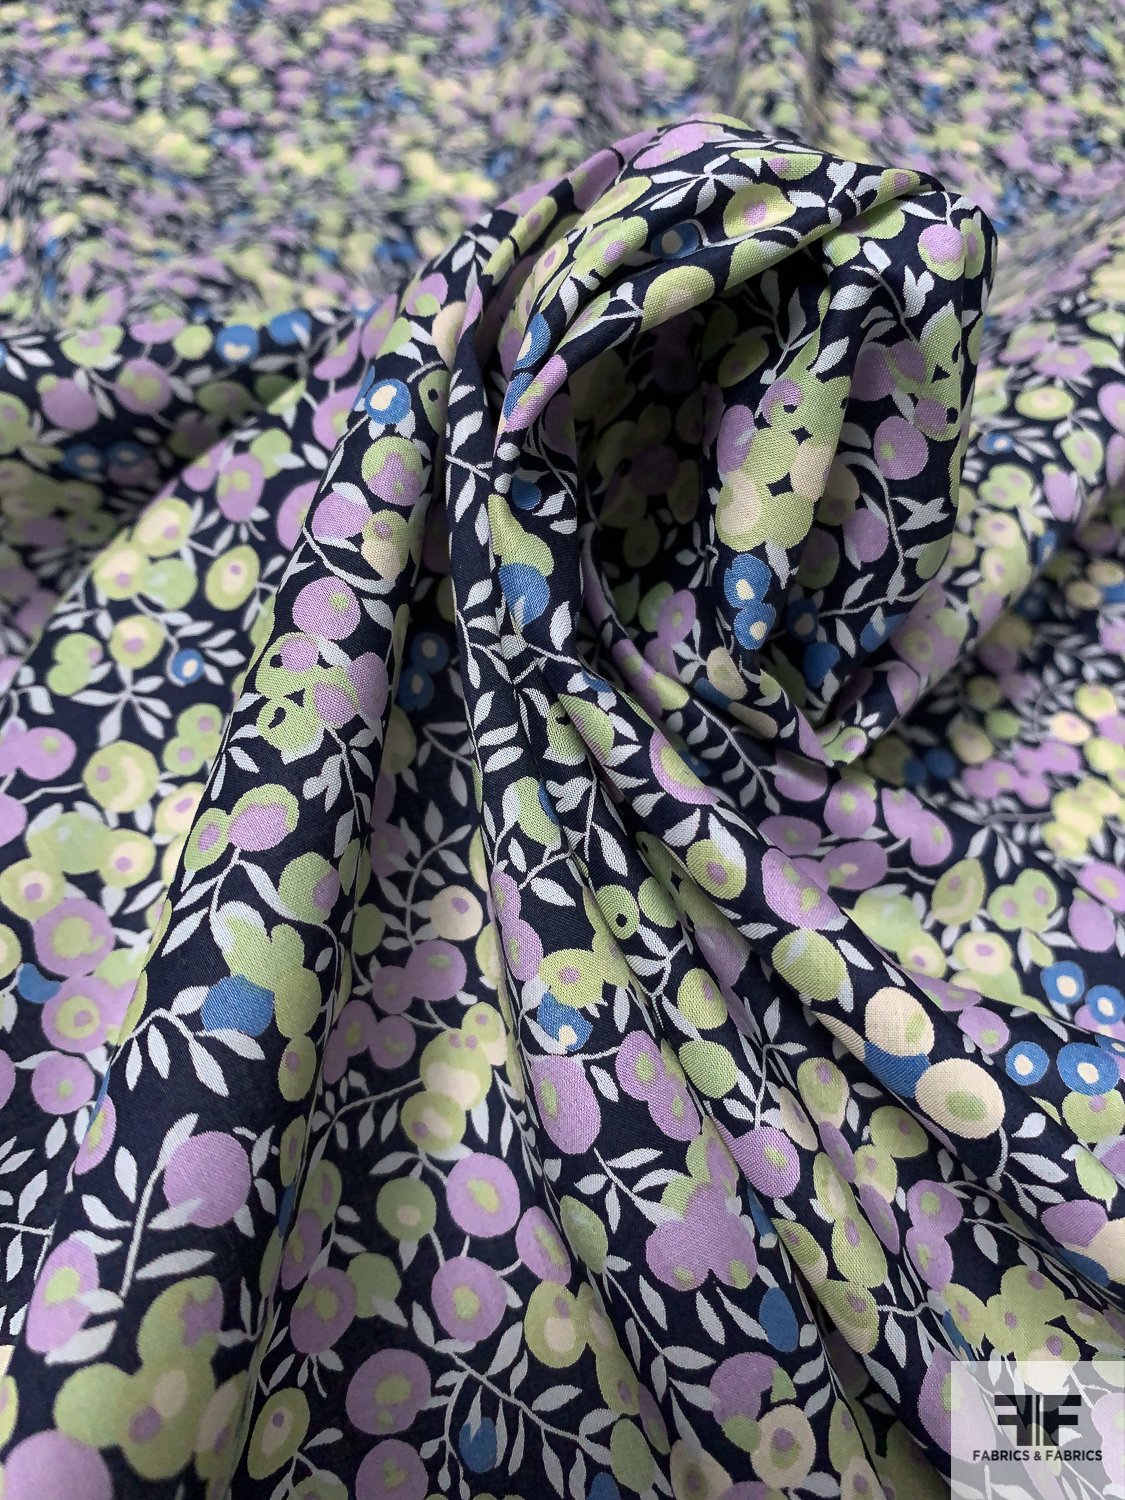 Leaf and Berry Printed Cotton Broadcloth - Navy / Sage / Lavender